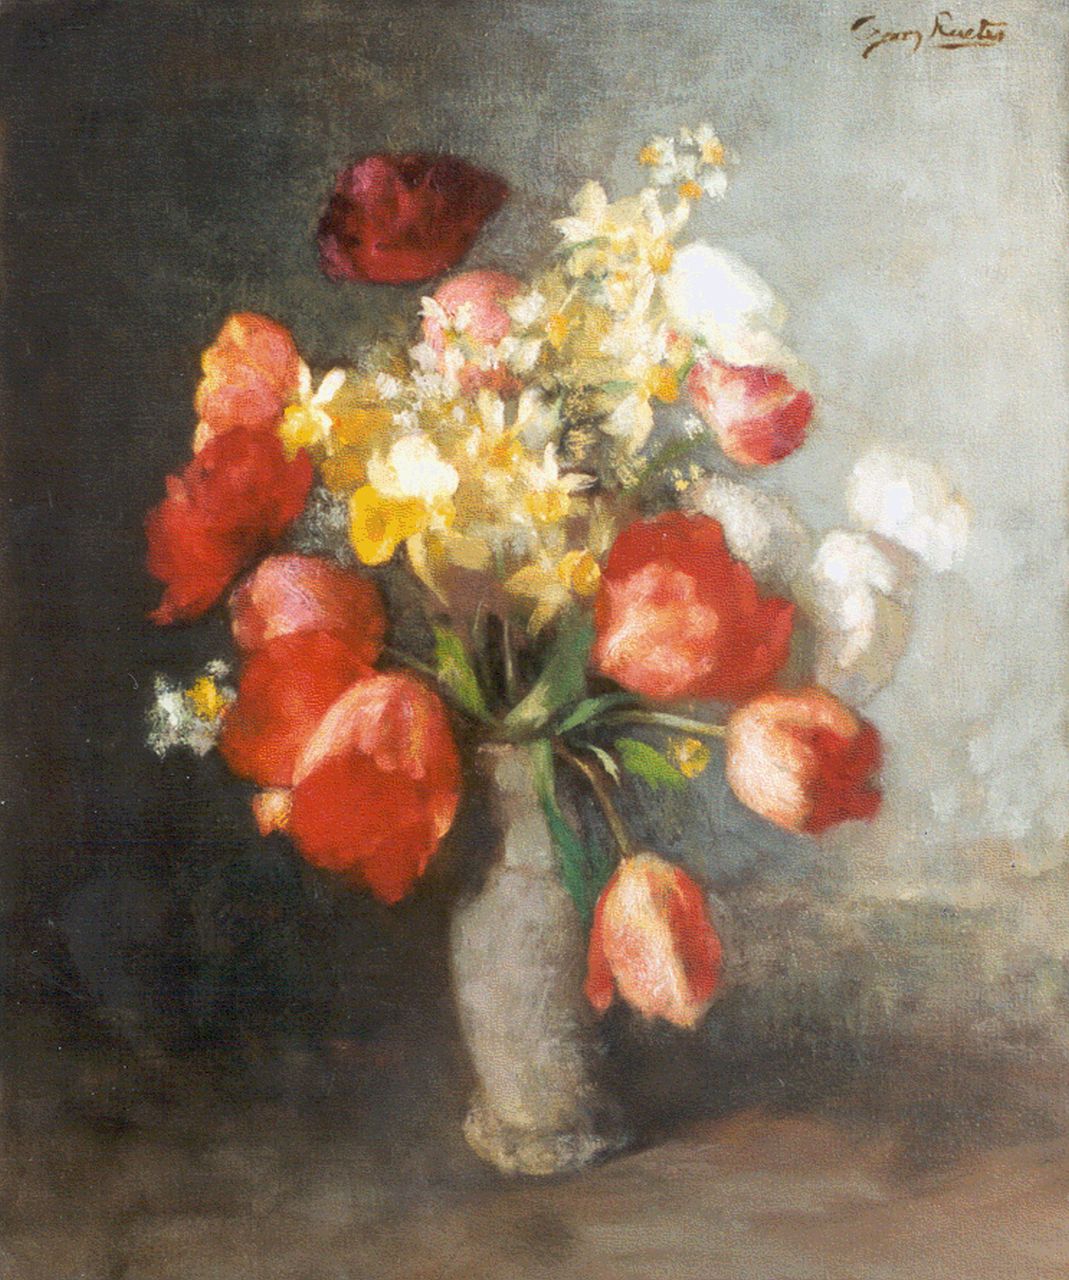 Rueter W.C.G.  | Wilhelm Christian 'Georg' Rueter, A still life with tulips and daffodils, oil on canvas 59.5 x 51.0 cm, signed u.r.